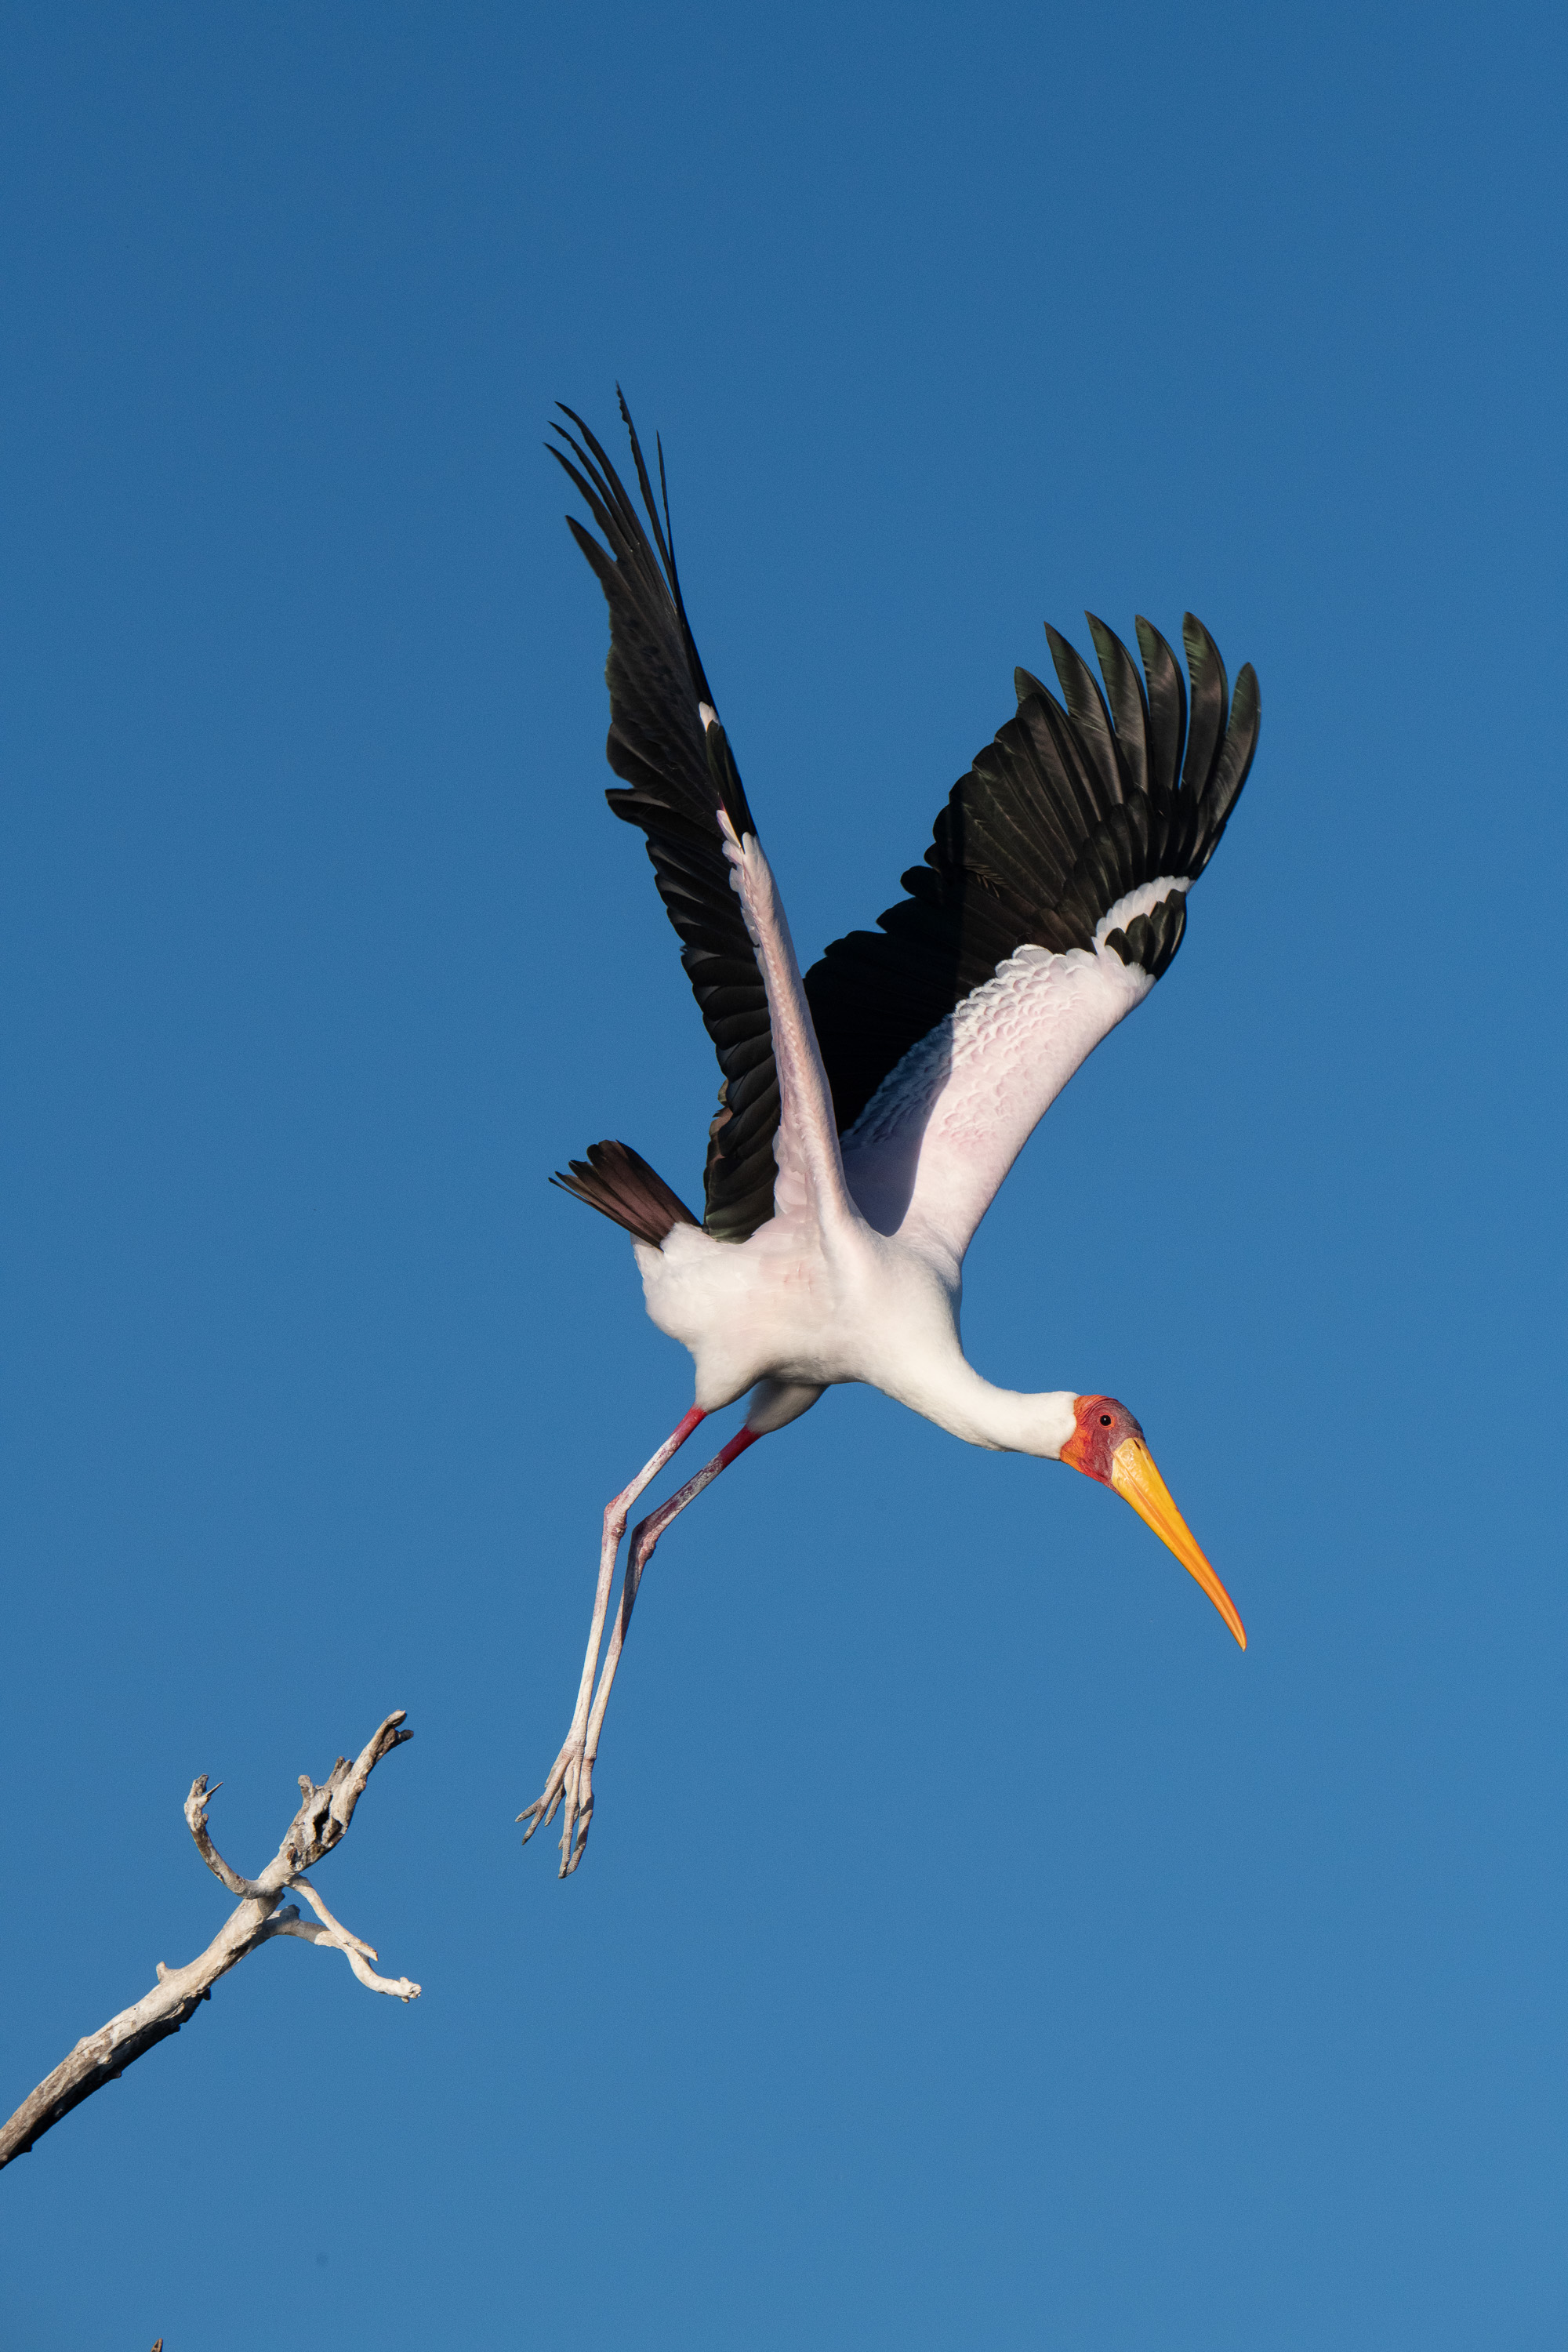 Yellow Billed Stork takes off